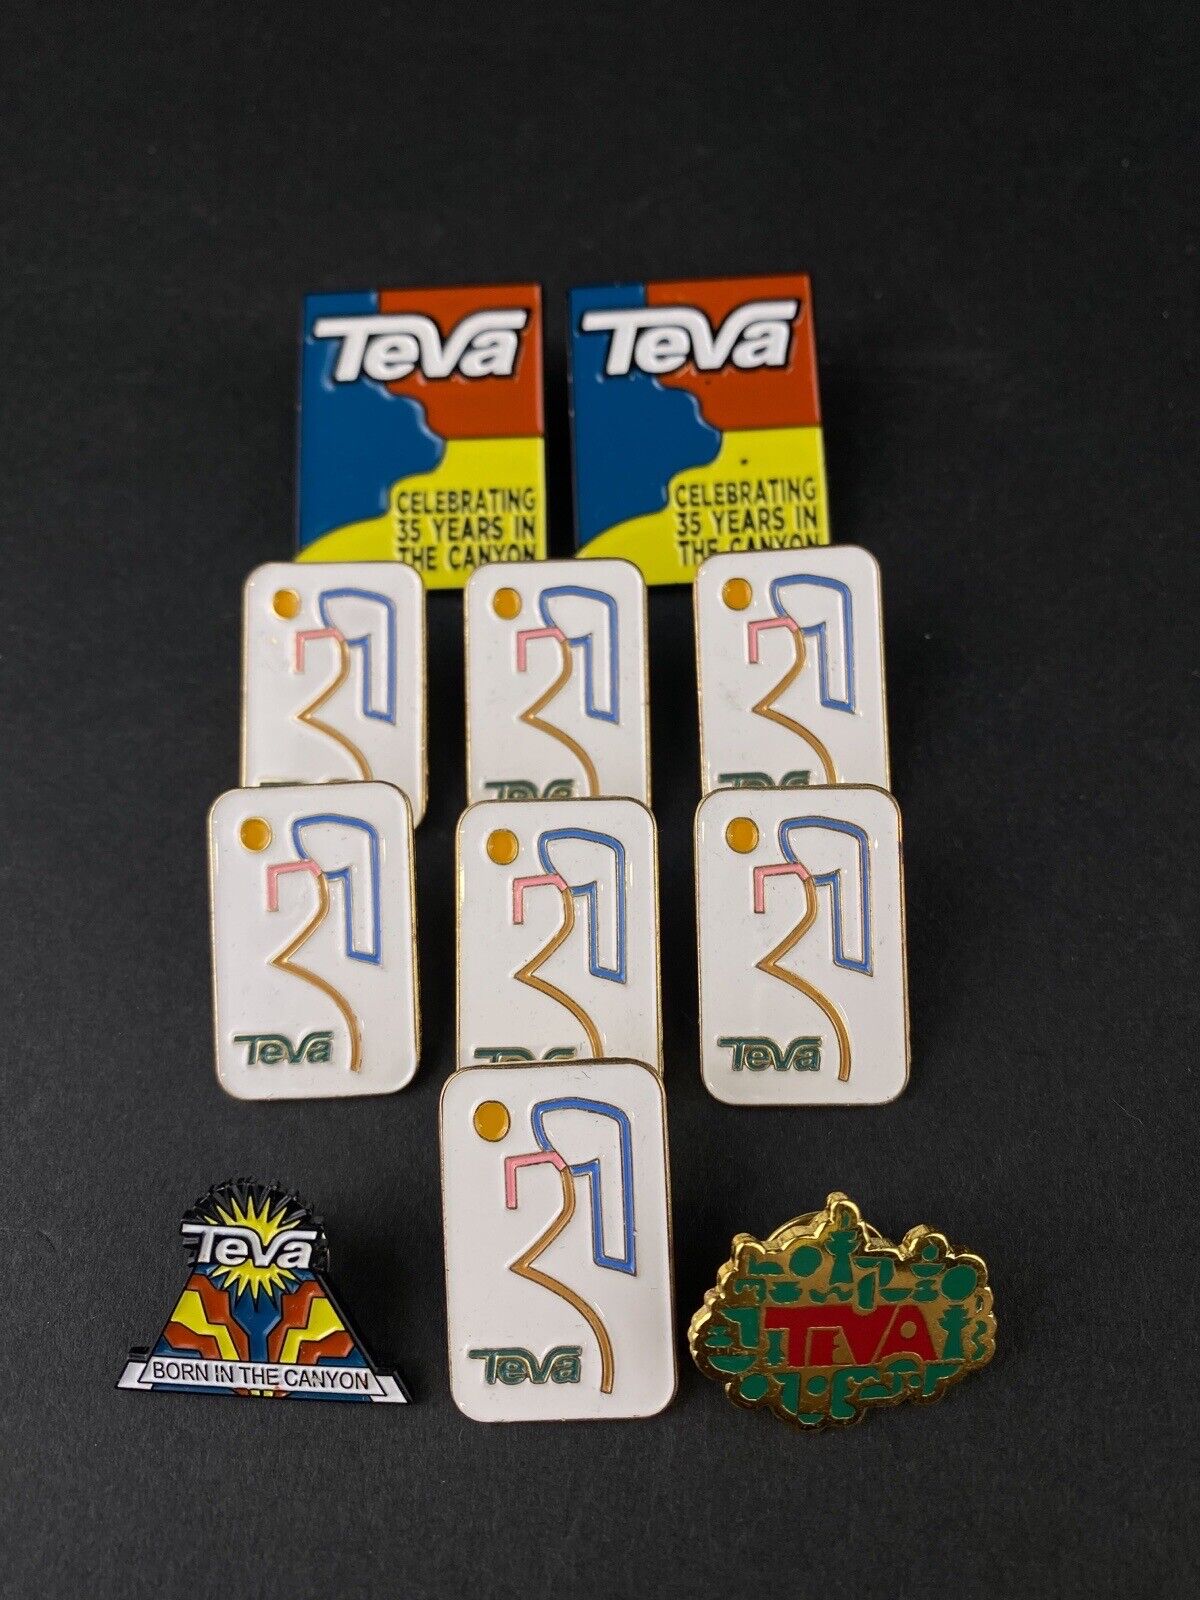 Teva Footwear Shoes Pin Badge Born In The Canyon Celebrating 35 Years Lot of 11